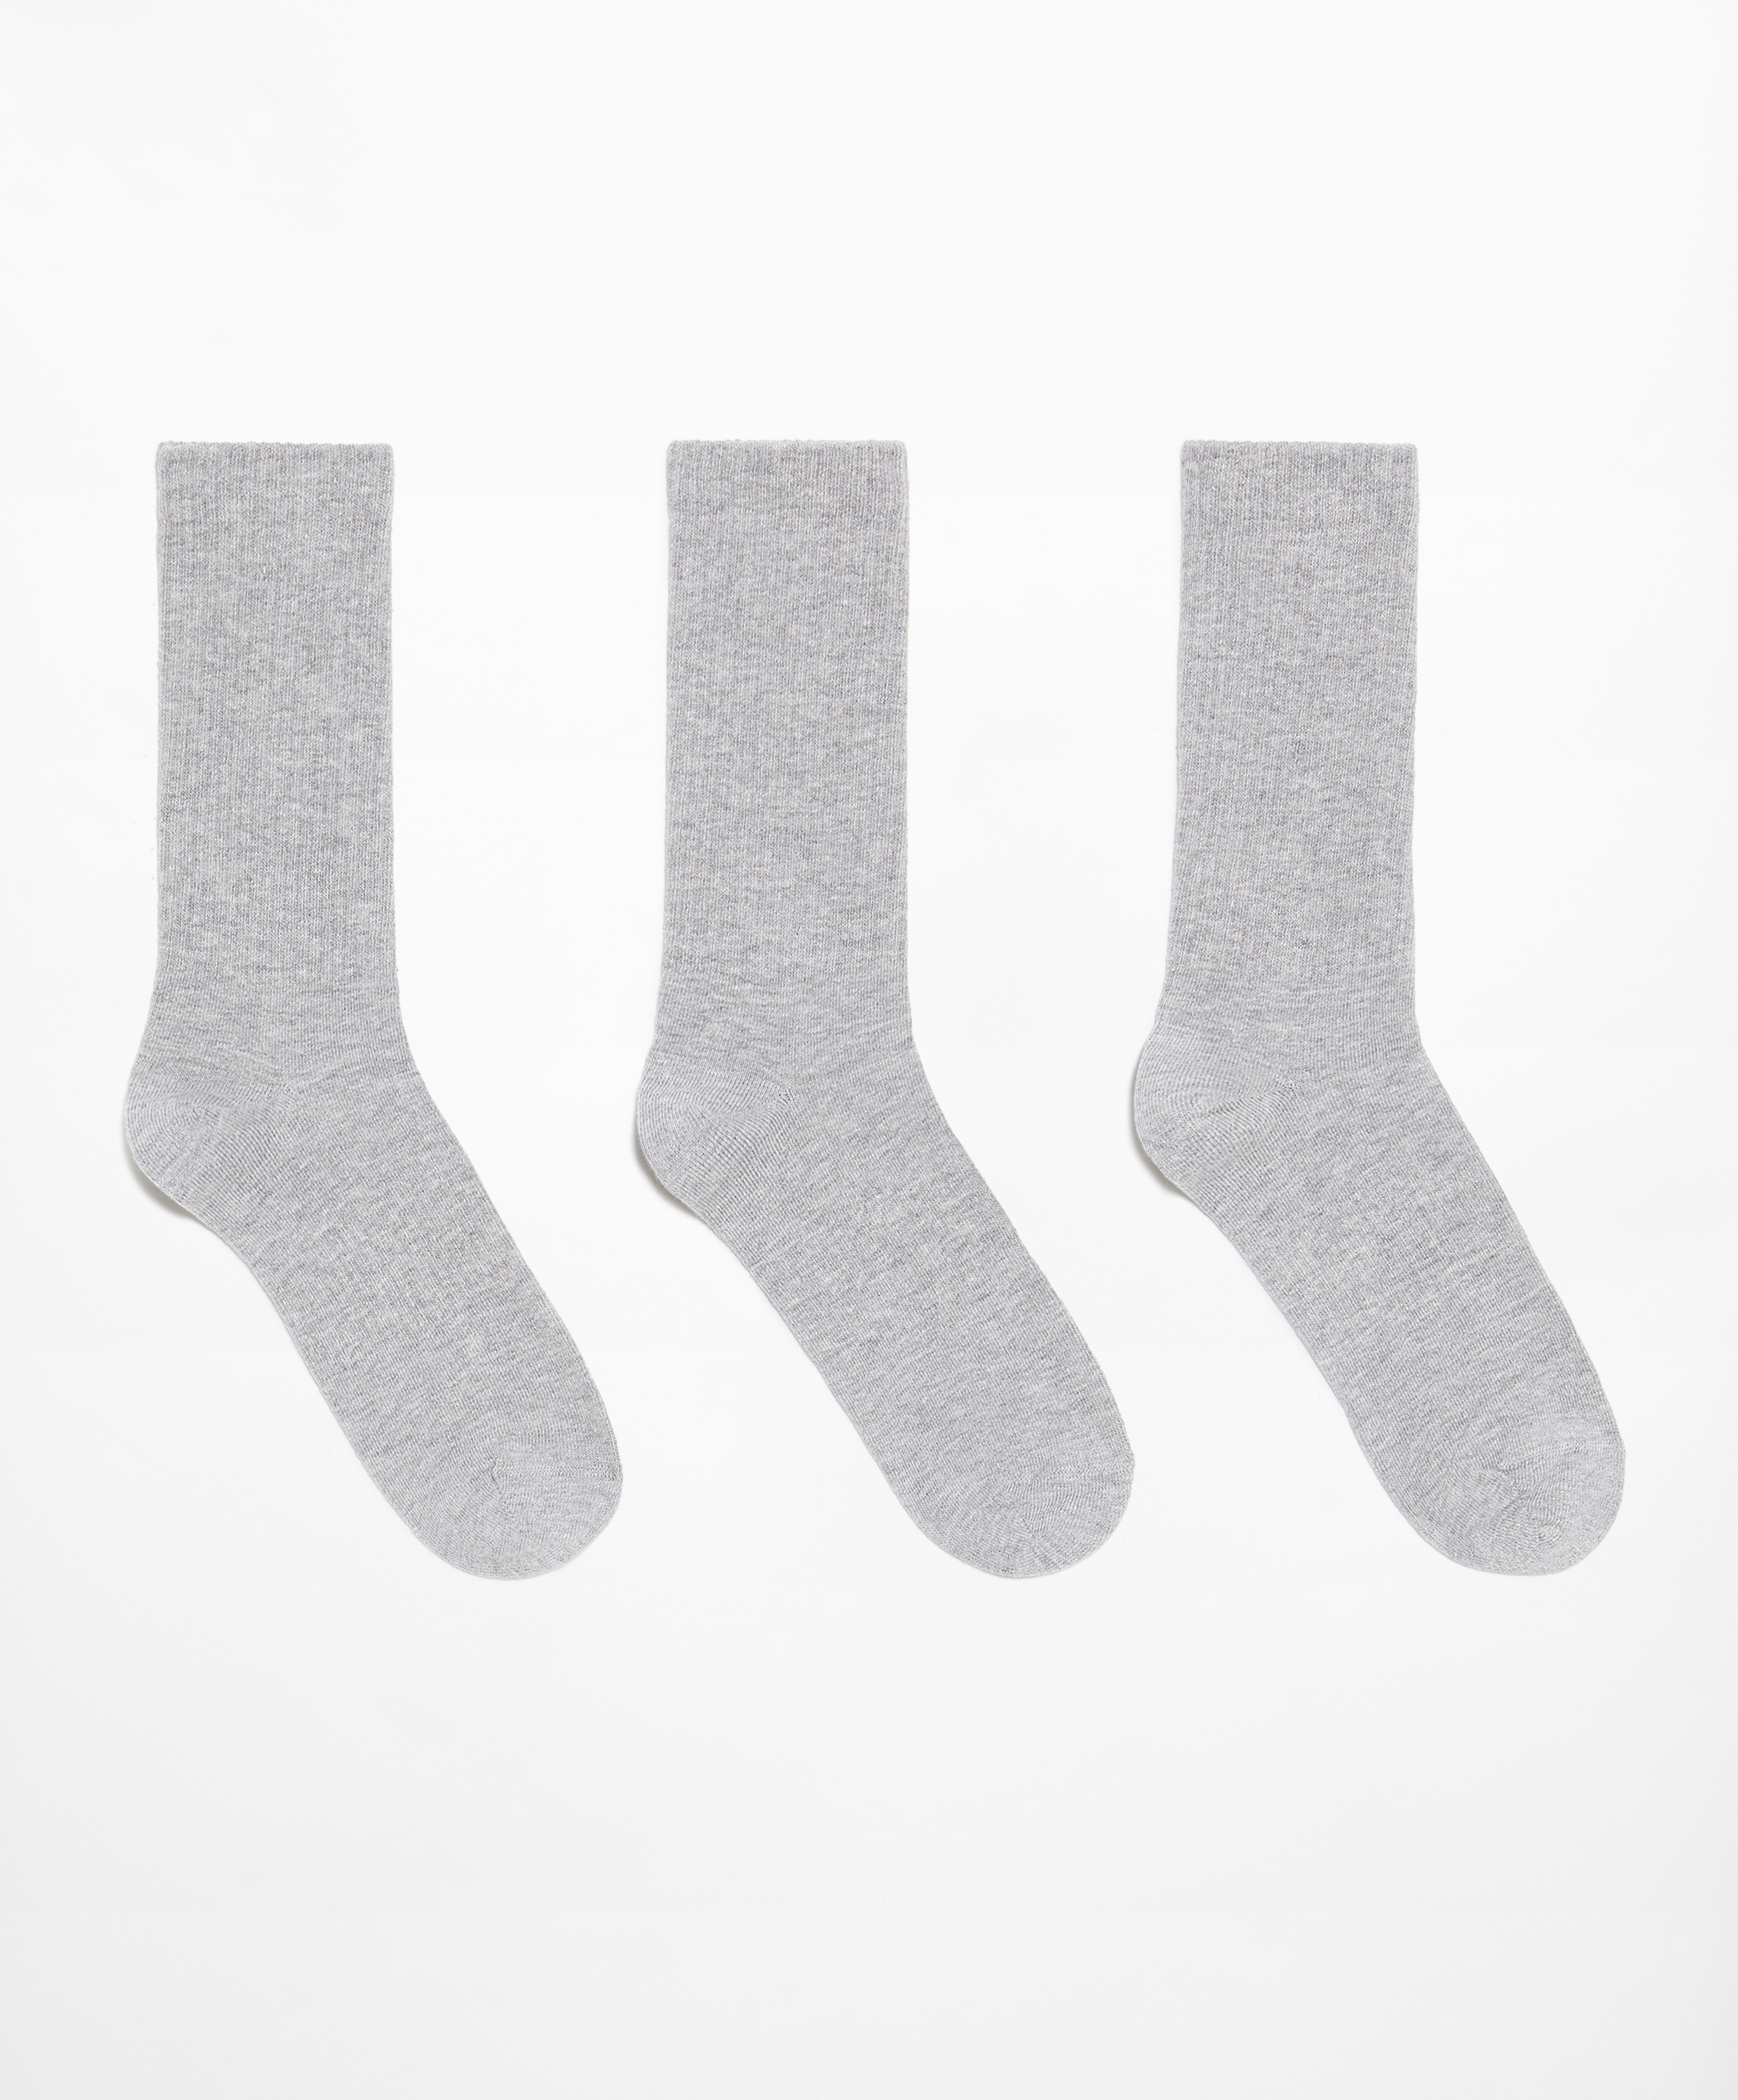 3 pairs of classic sports socks with cotton